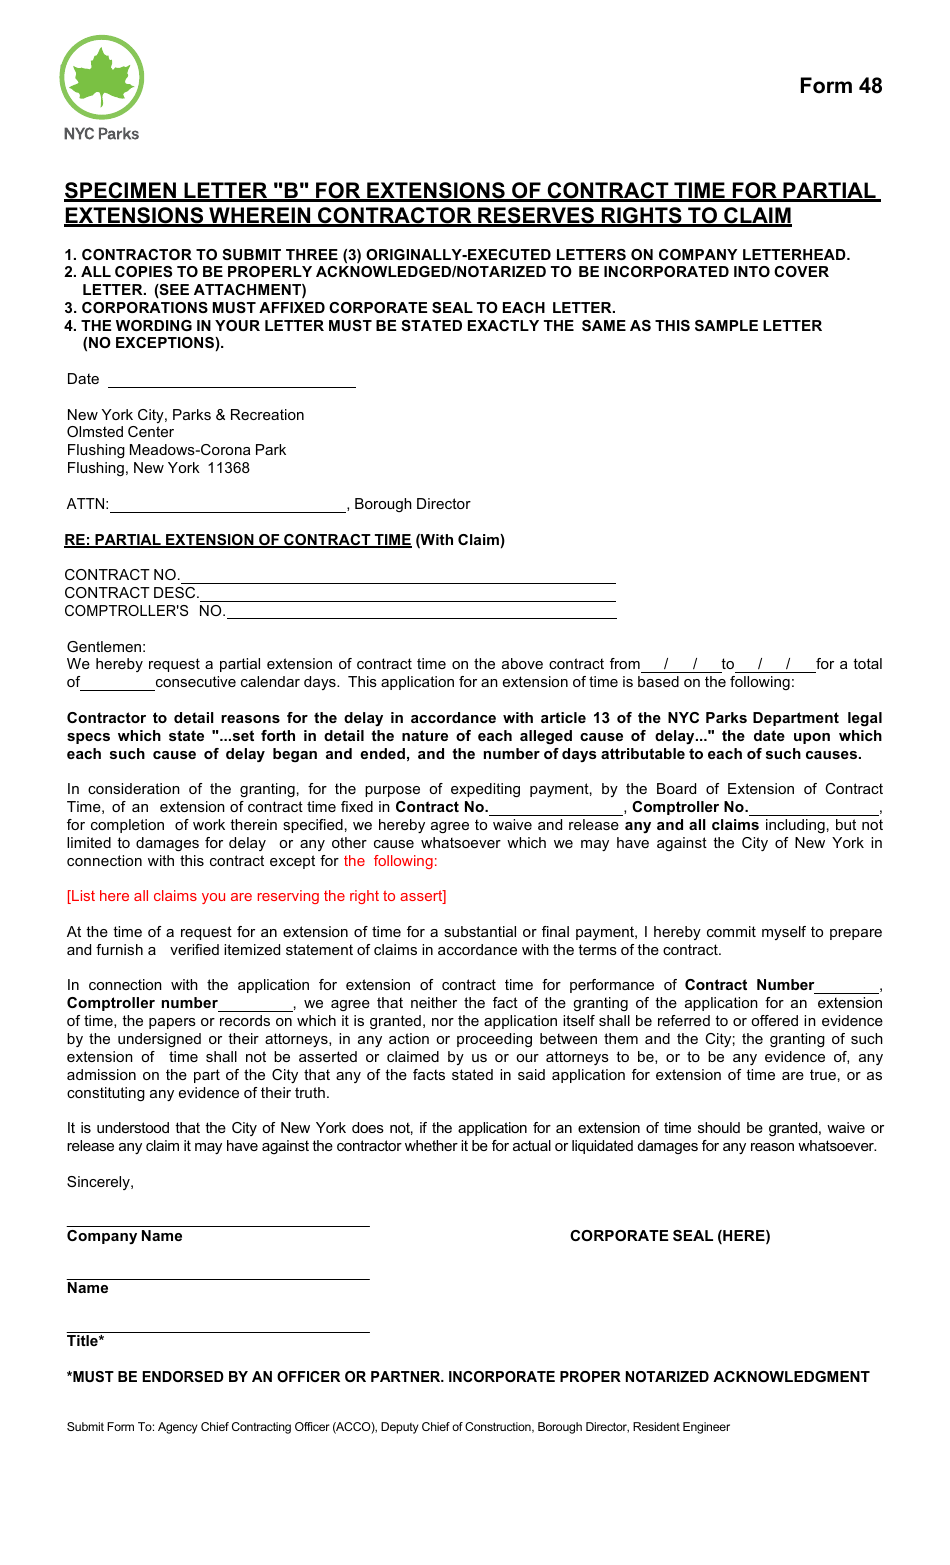 Form 48 Specimen Letter b for Extensions of Contract Time for Partial Extensions Wherein Contractor Reserves Rights to Claim - New York City, Page 1